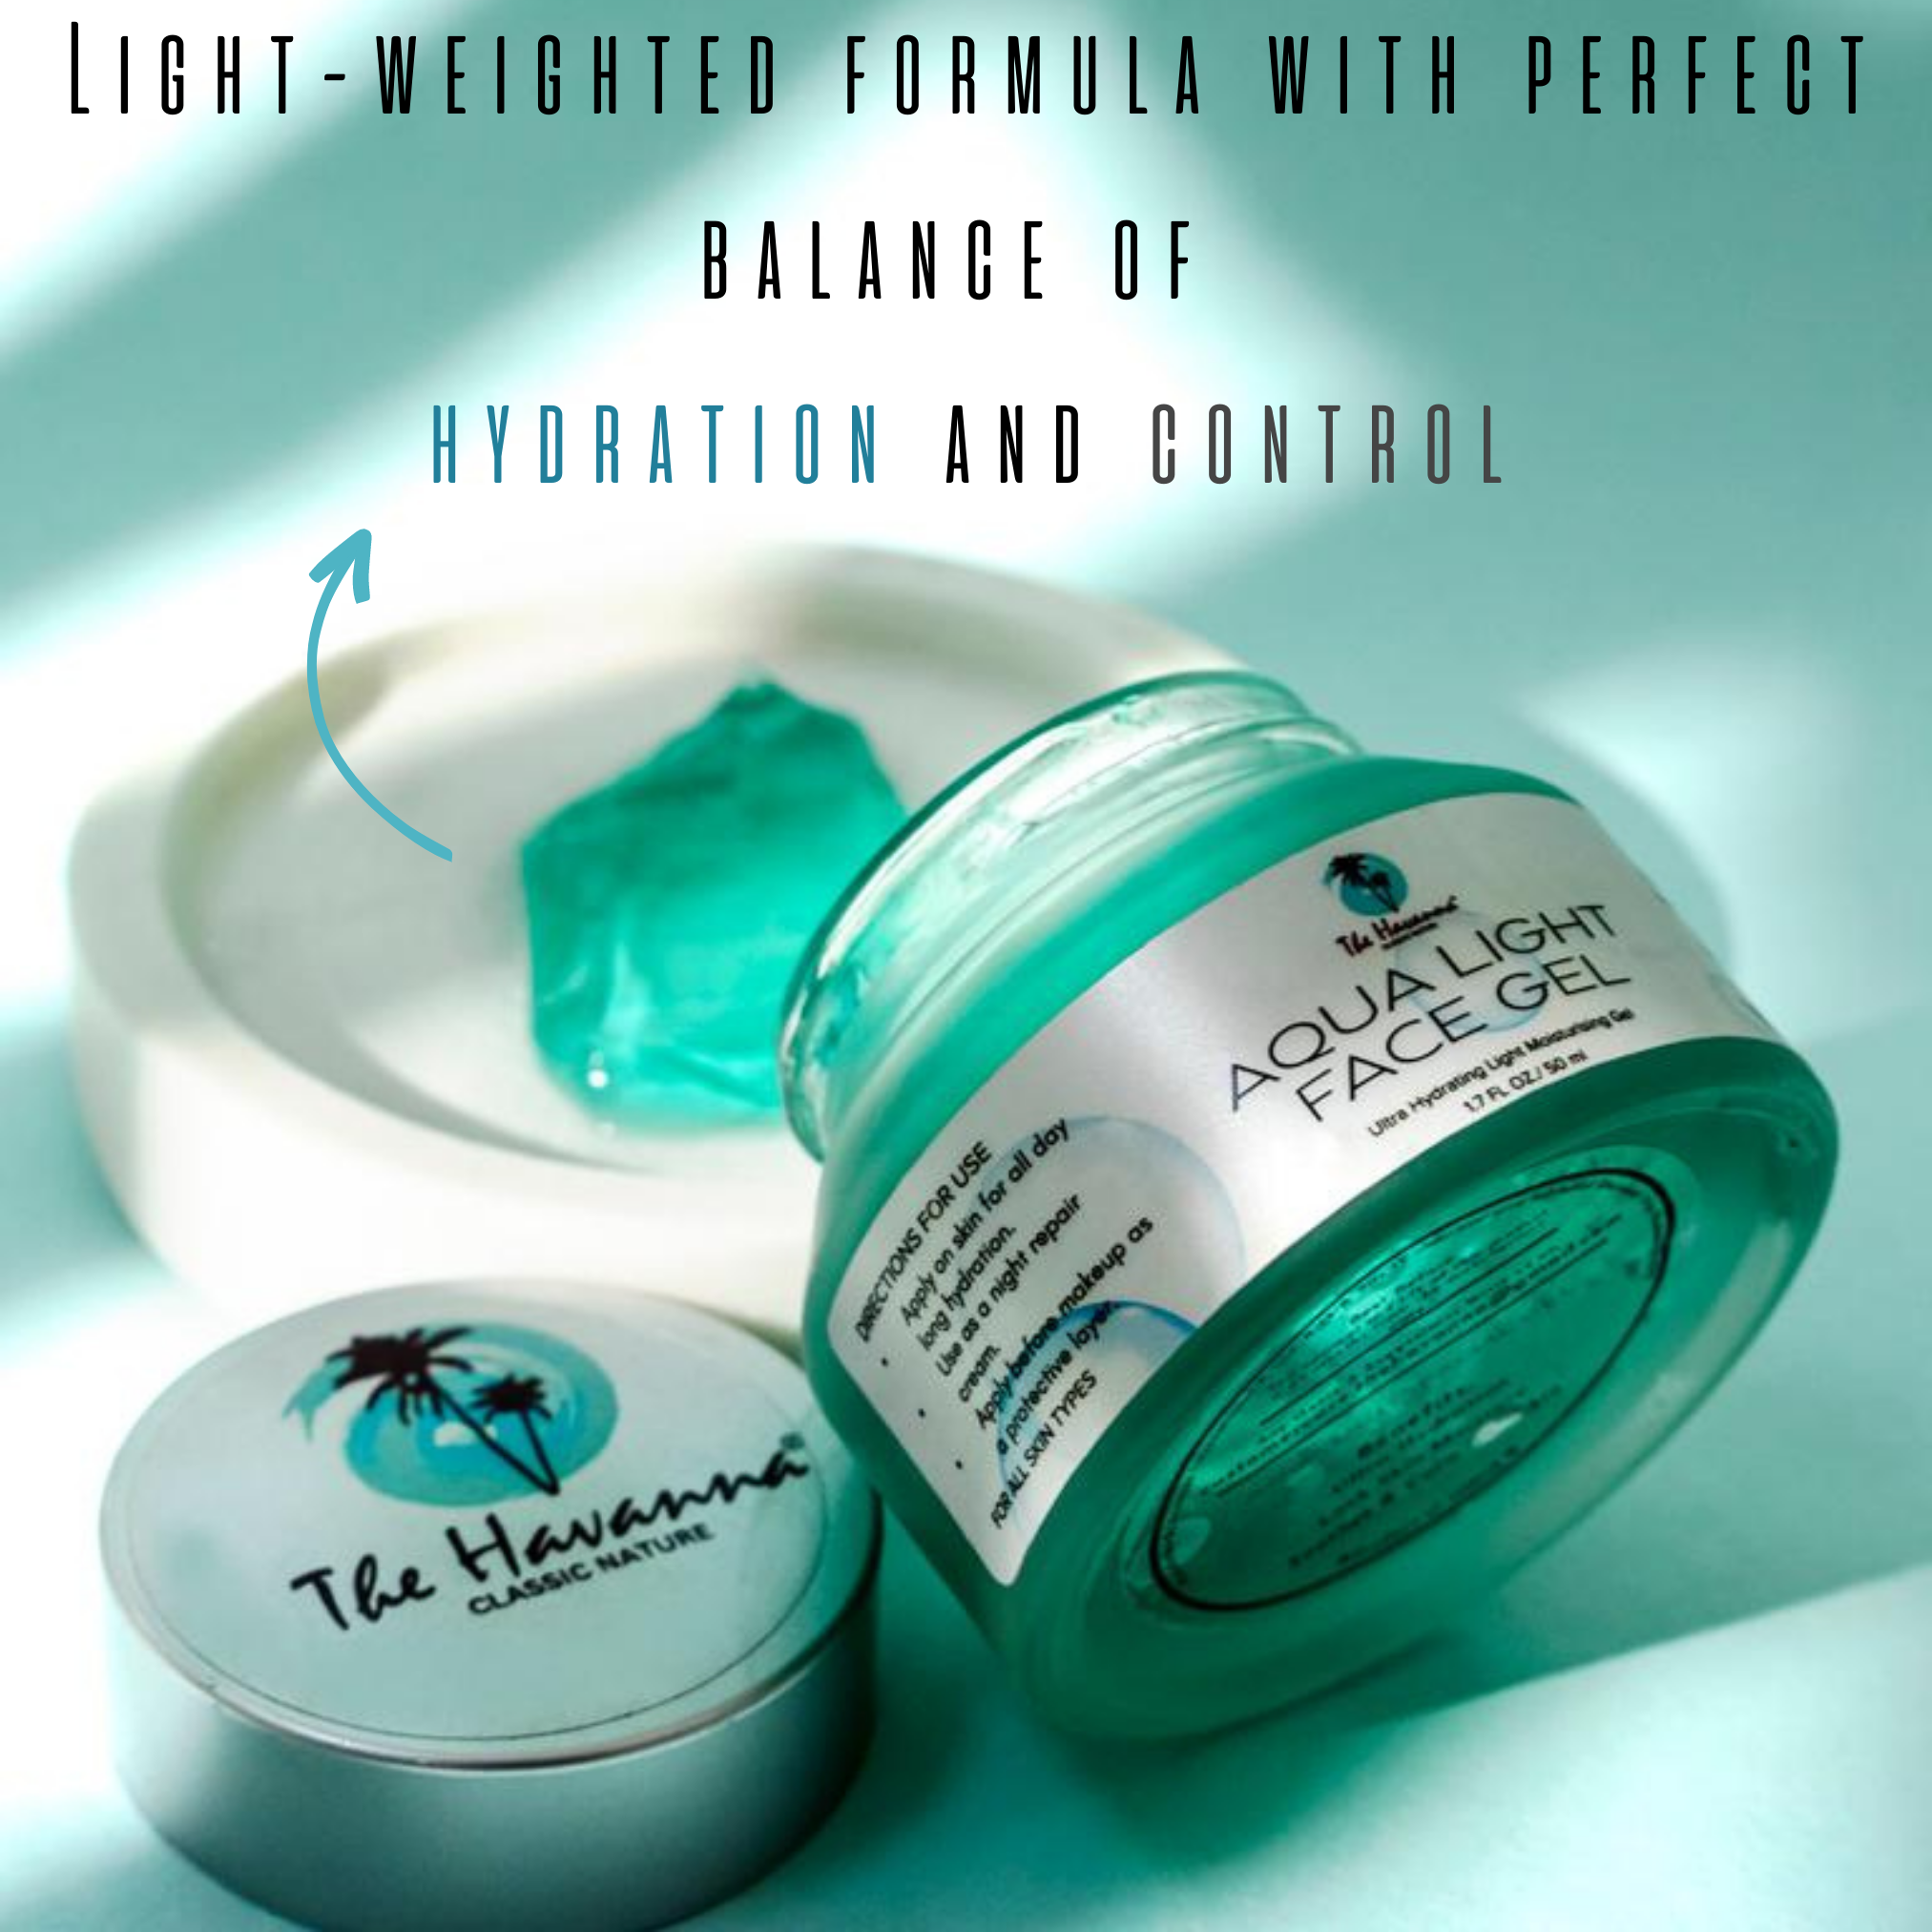 havanna aqua light face gel is light weighted formula with balance of hydration and control